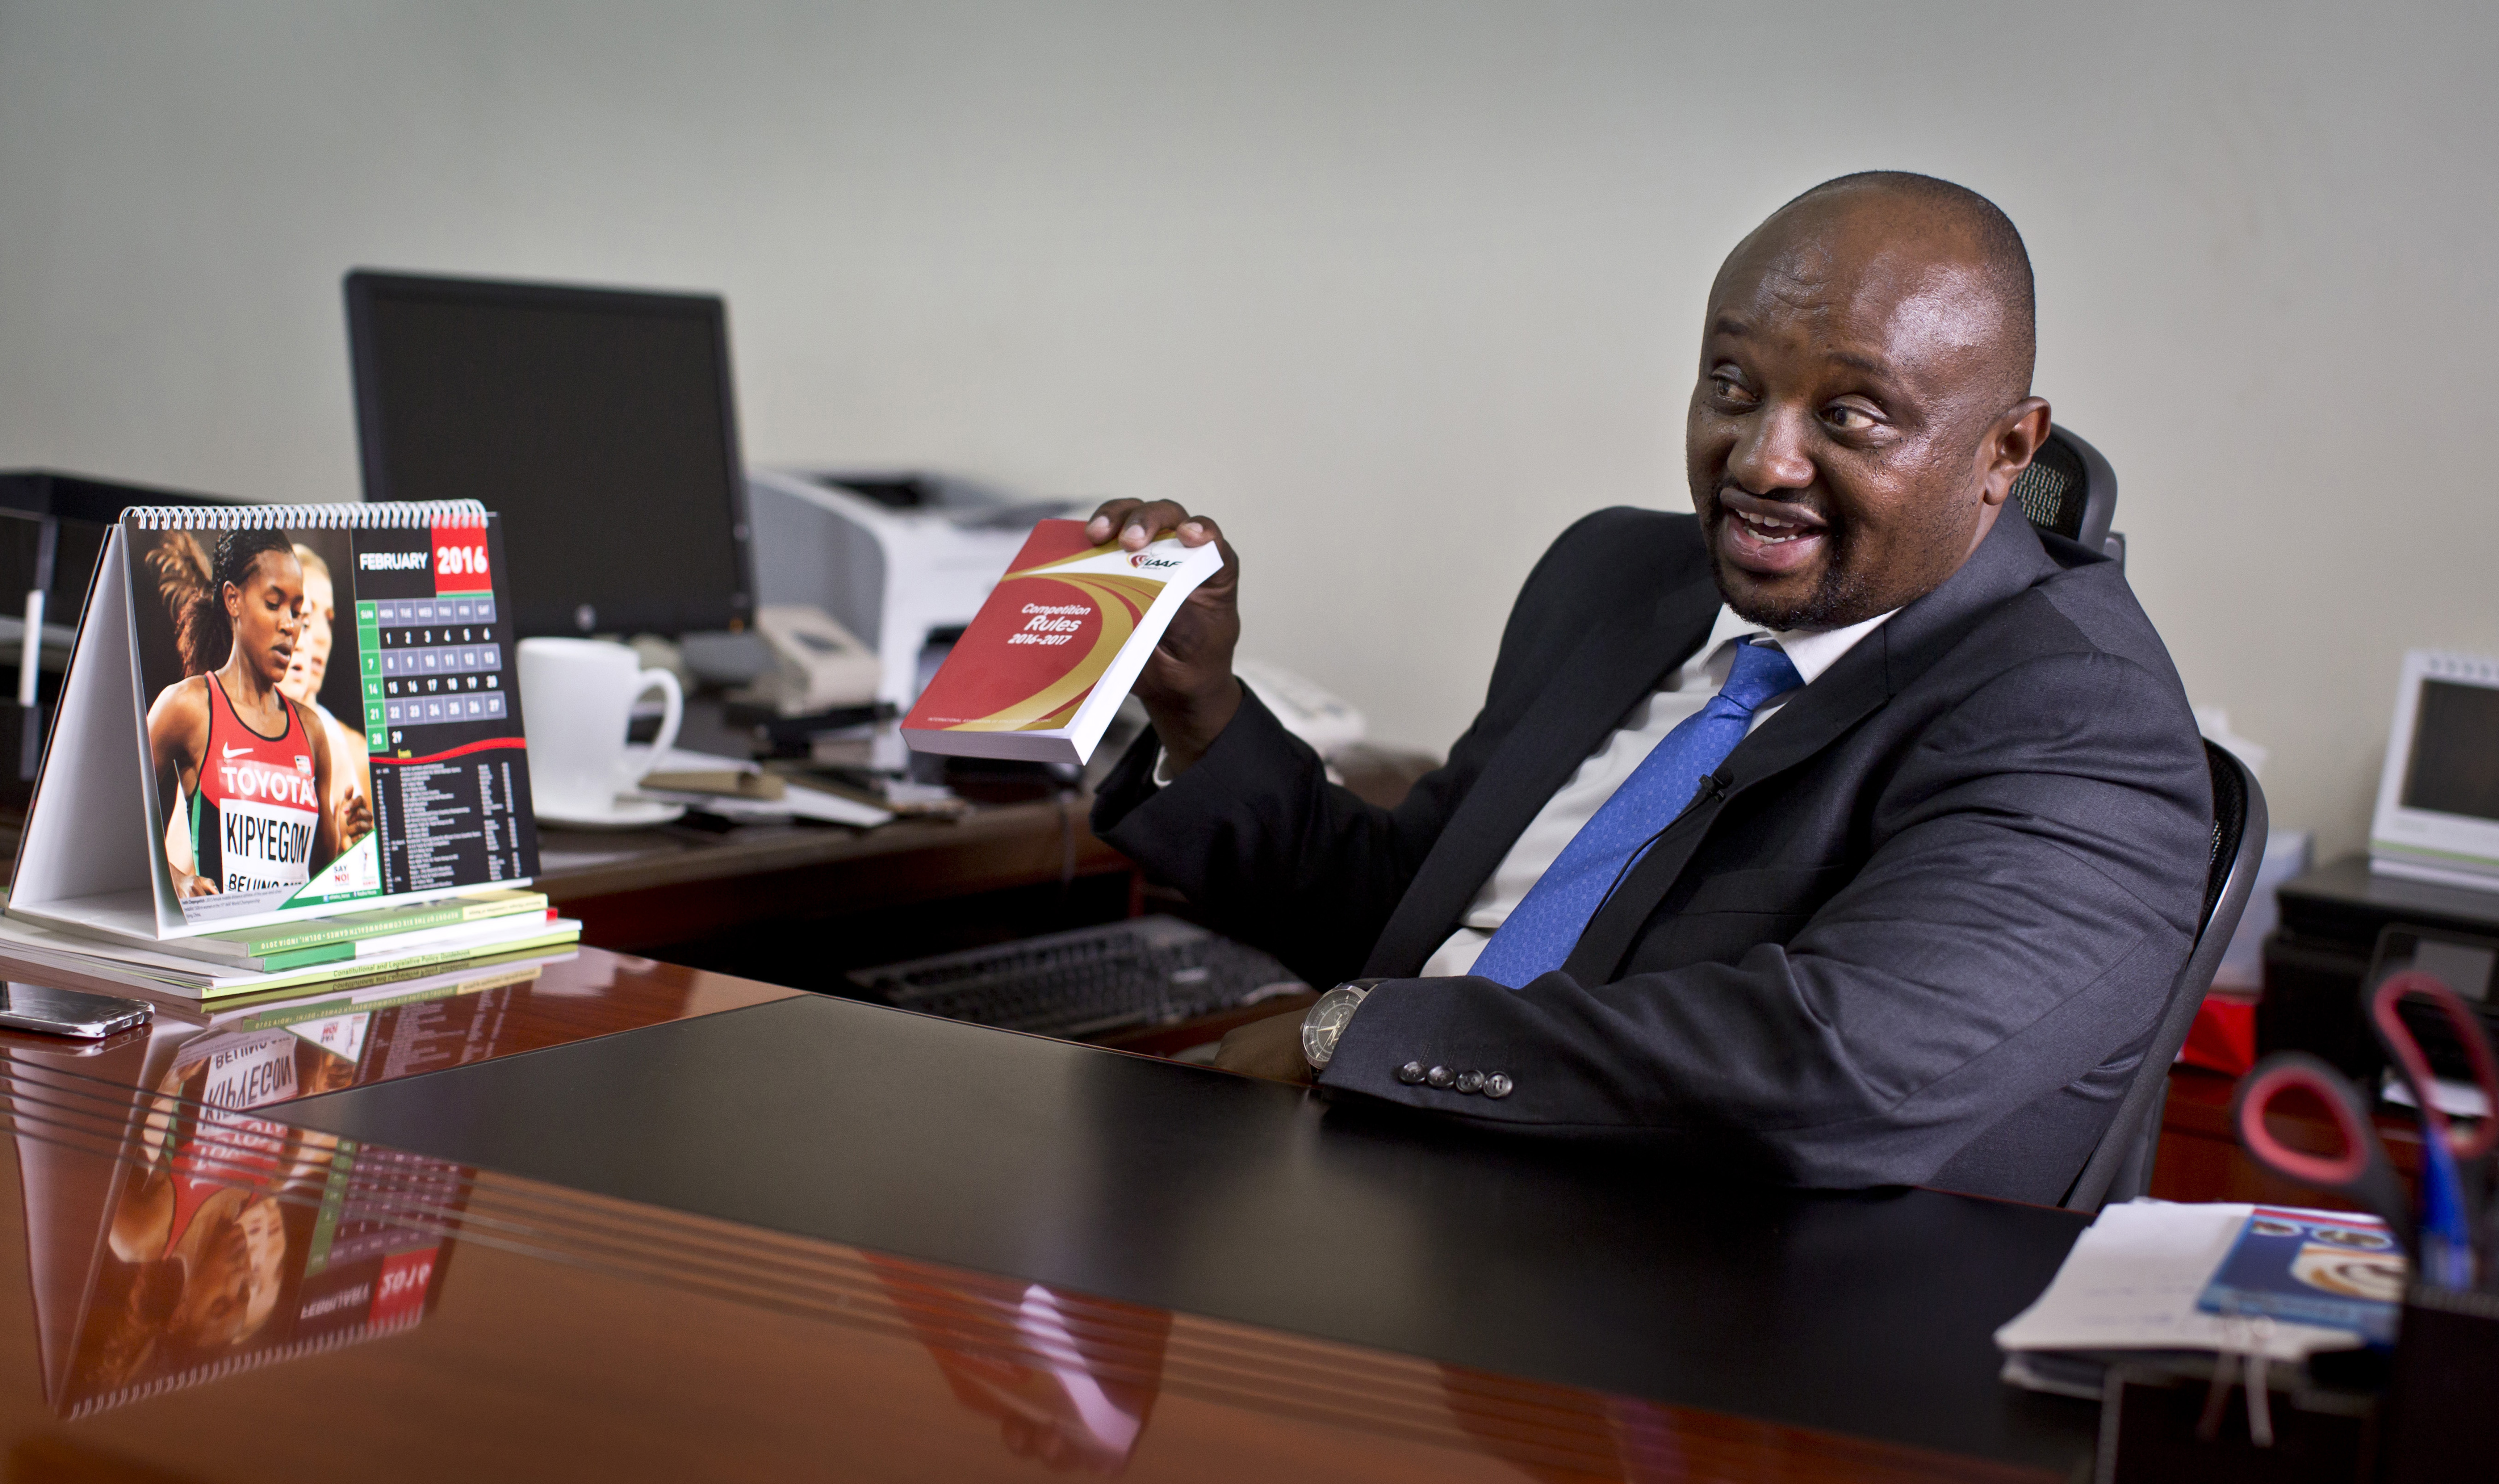 FILE---In this file photo taken Monday, Feb. 8, 2016, Athletics Kenya CEO Isaac Mwangi holds up a copy of the IAAF Competition Rules book, to illustrate his denial that Athletics Kenya would have the power to shave time off athletes’ bans, during an interview with The Associated Press at his office in Nairobi, Kenya. The chief executive of the track and field governing body in running powerhouse Kenya has temporarily stepped aside after two athletes alleged in an interview with The Associated Press that he asked them for a bribe to reduce their bans for doping. (AP Photo/Ben Curtis, File)